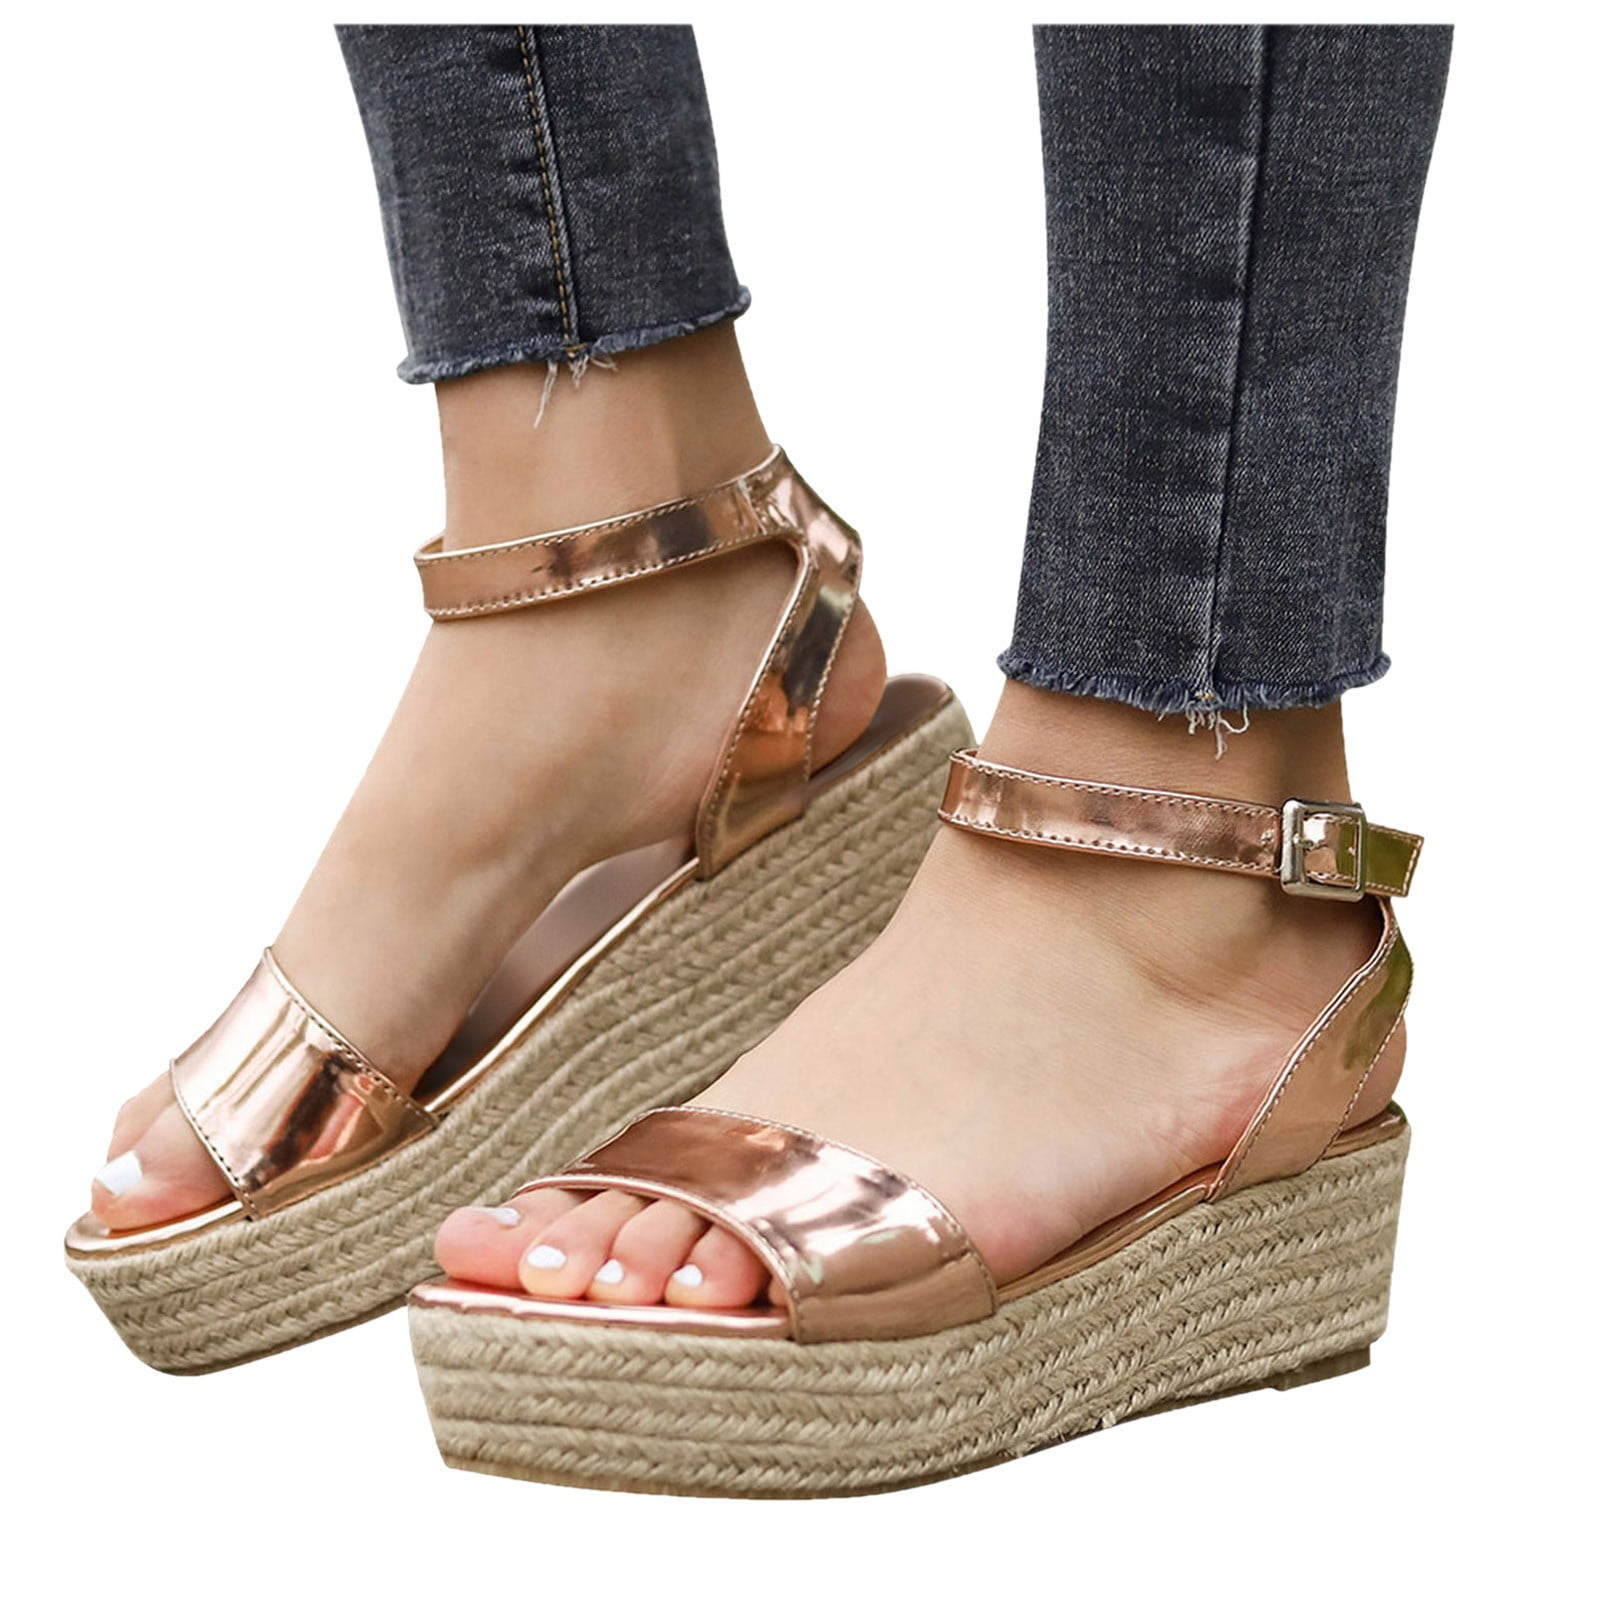 eczipvz Shoes for Women Wedges for Women Dressy Comfortable Wedge Sandals  for Women Comfortable Strappy Platform Sandals Casual Summer Shoes,Brown 